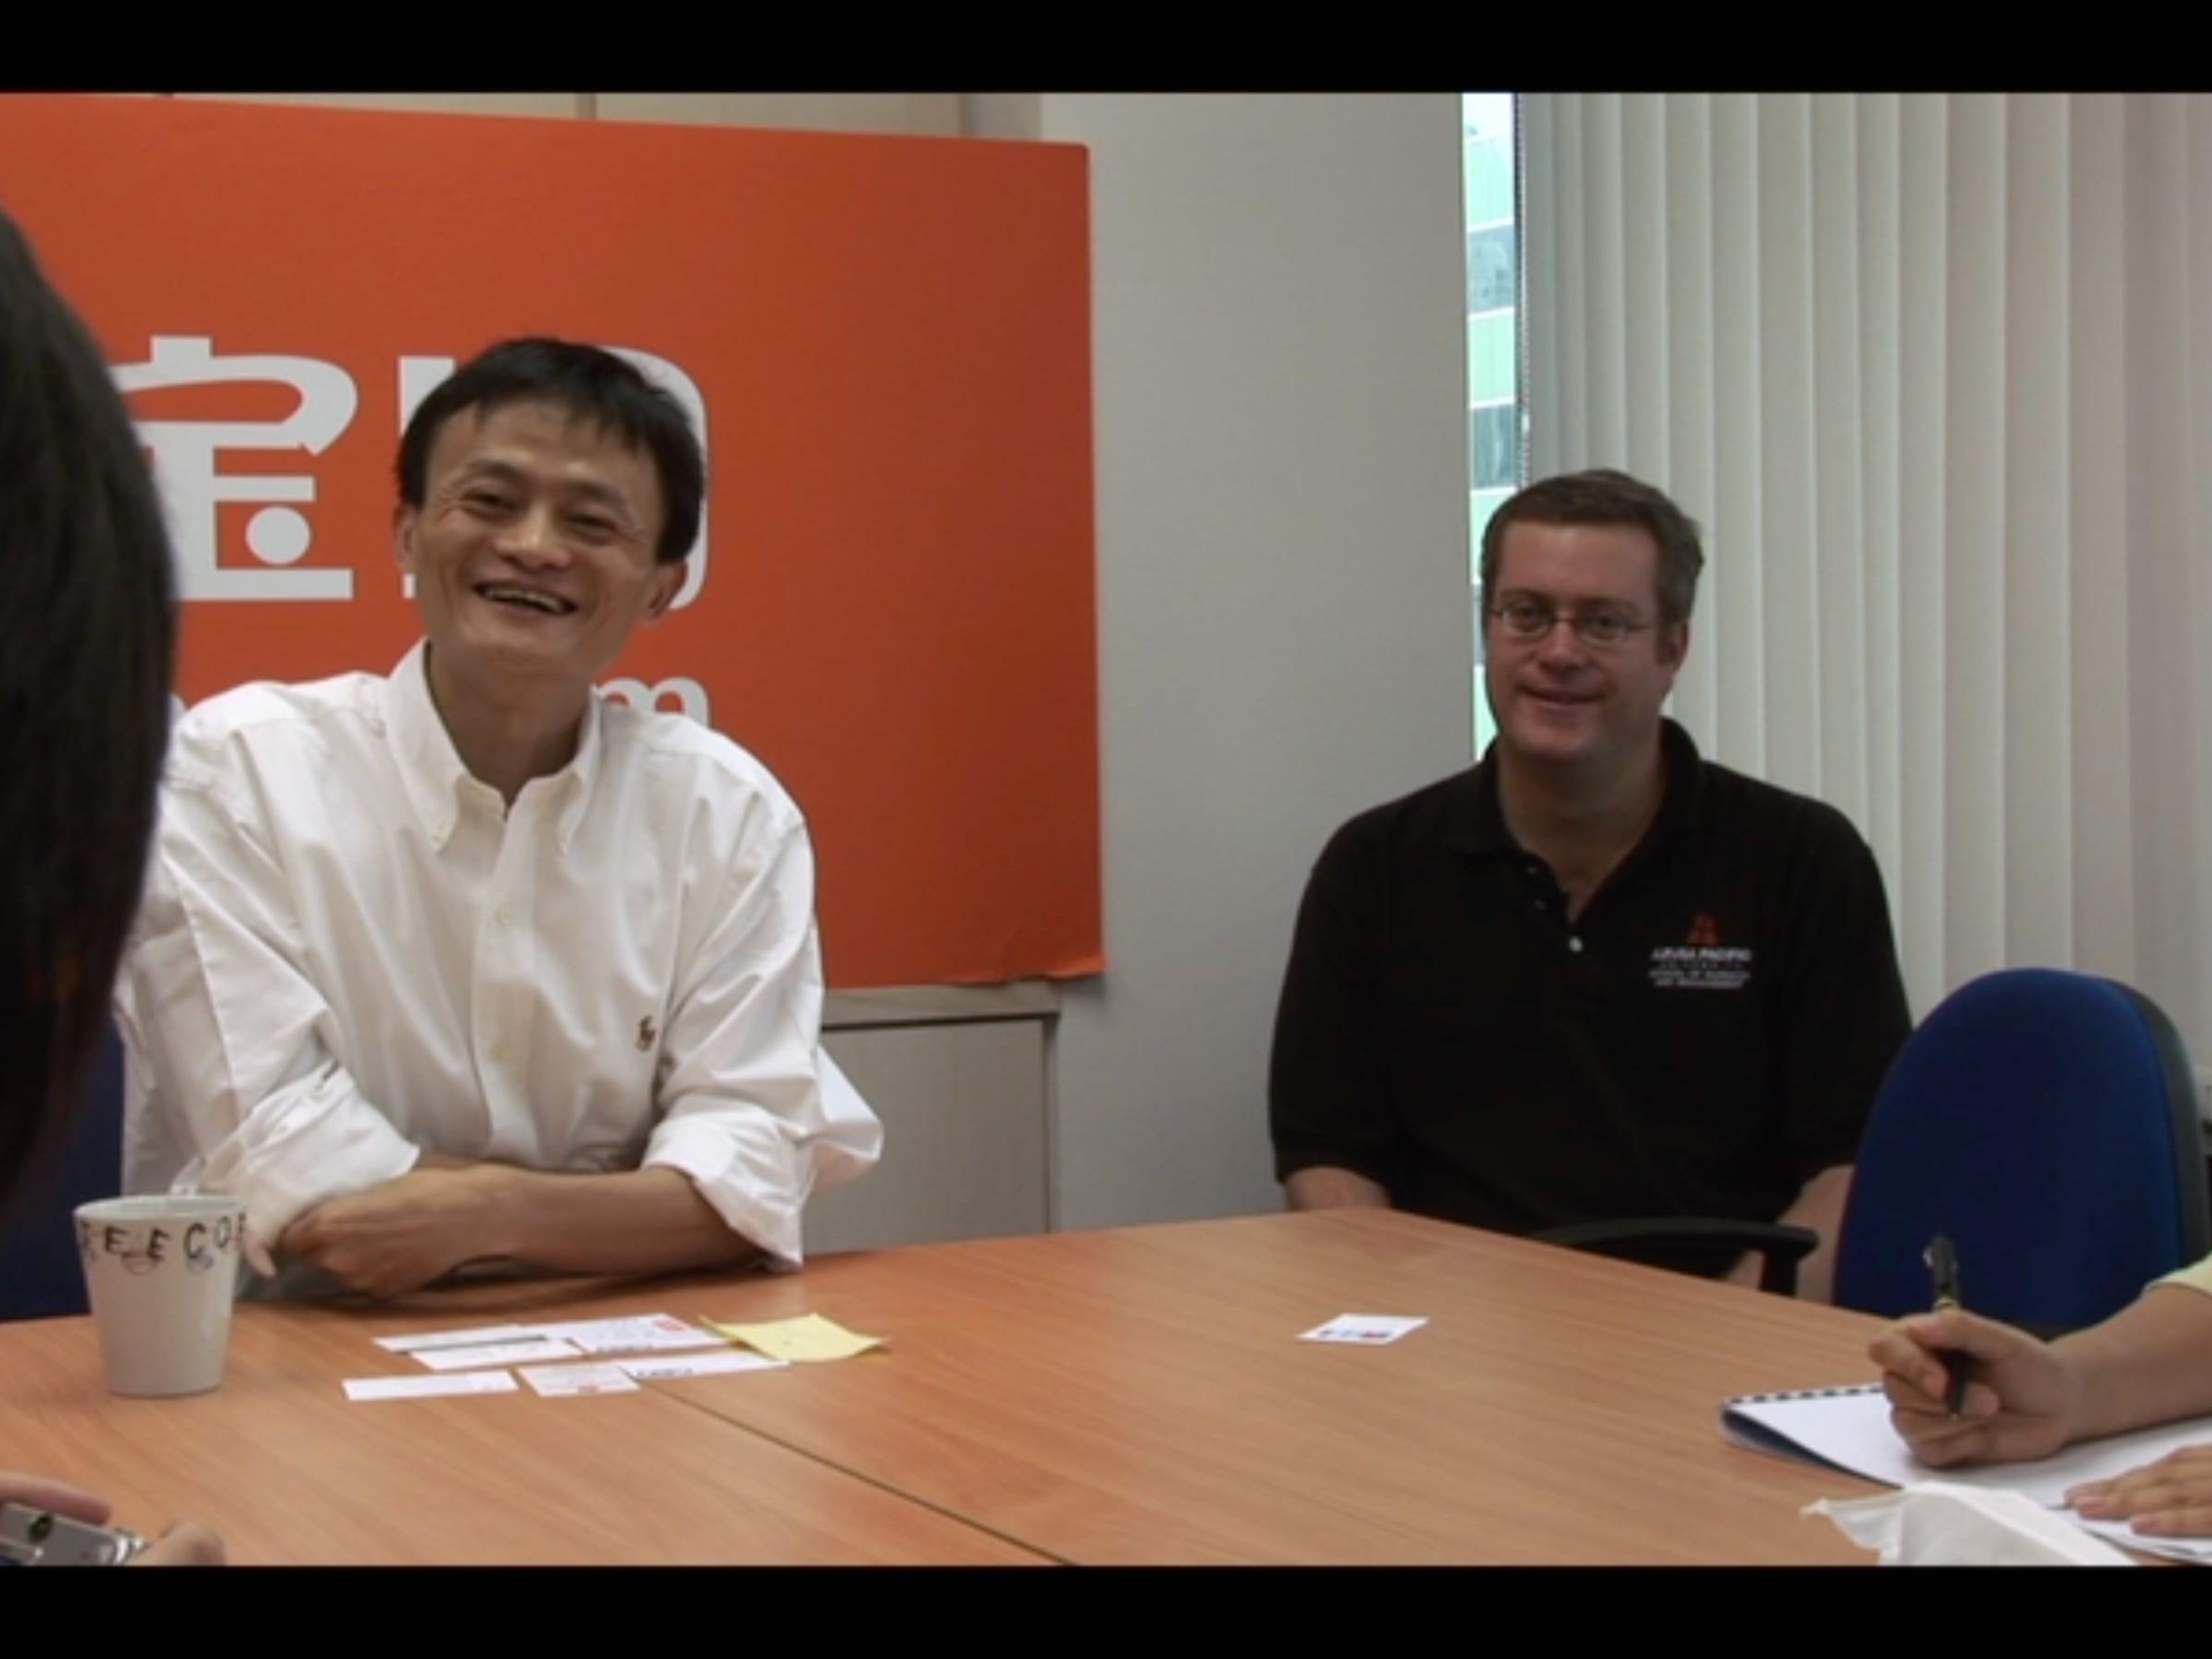 Alibaba cofounder Jack Ma and Porter Erisman at a press conference for Taobao after the SARS crisis.